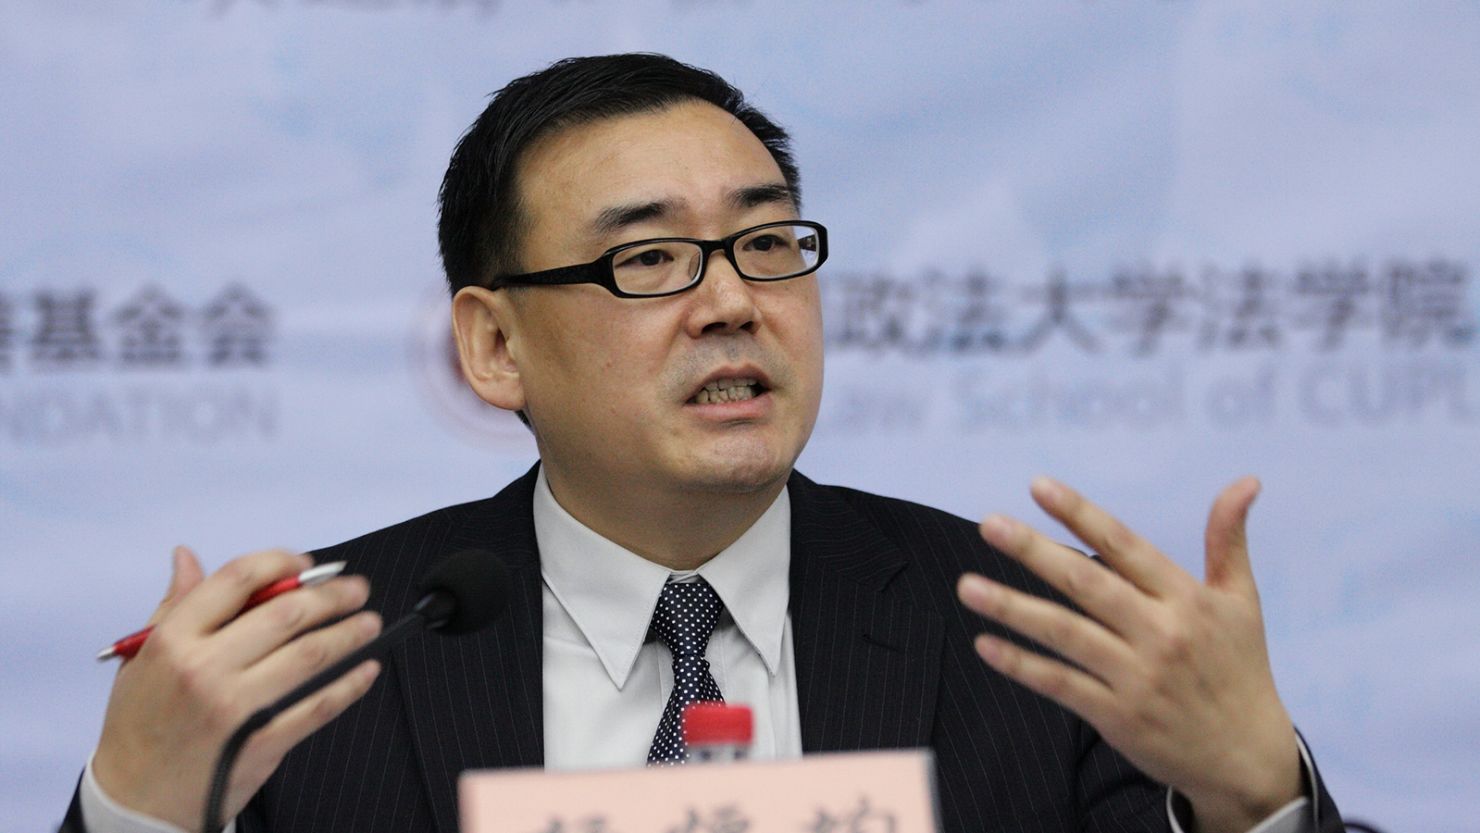 Chinese-Australian writer Yang Hengjun attends a lecture at the Beijing Institute of Technology in the Chinese capital on 18 November 2010.